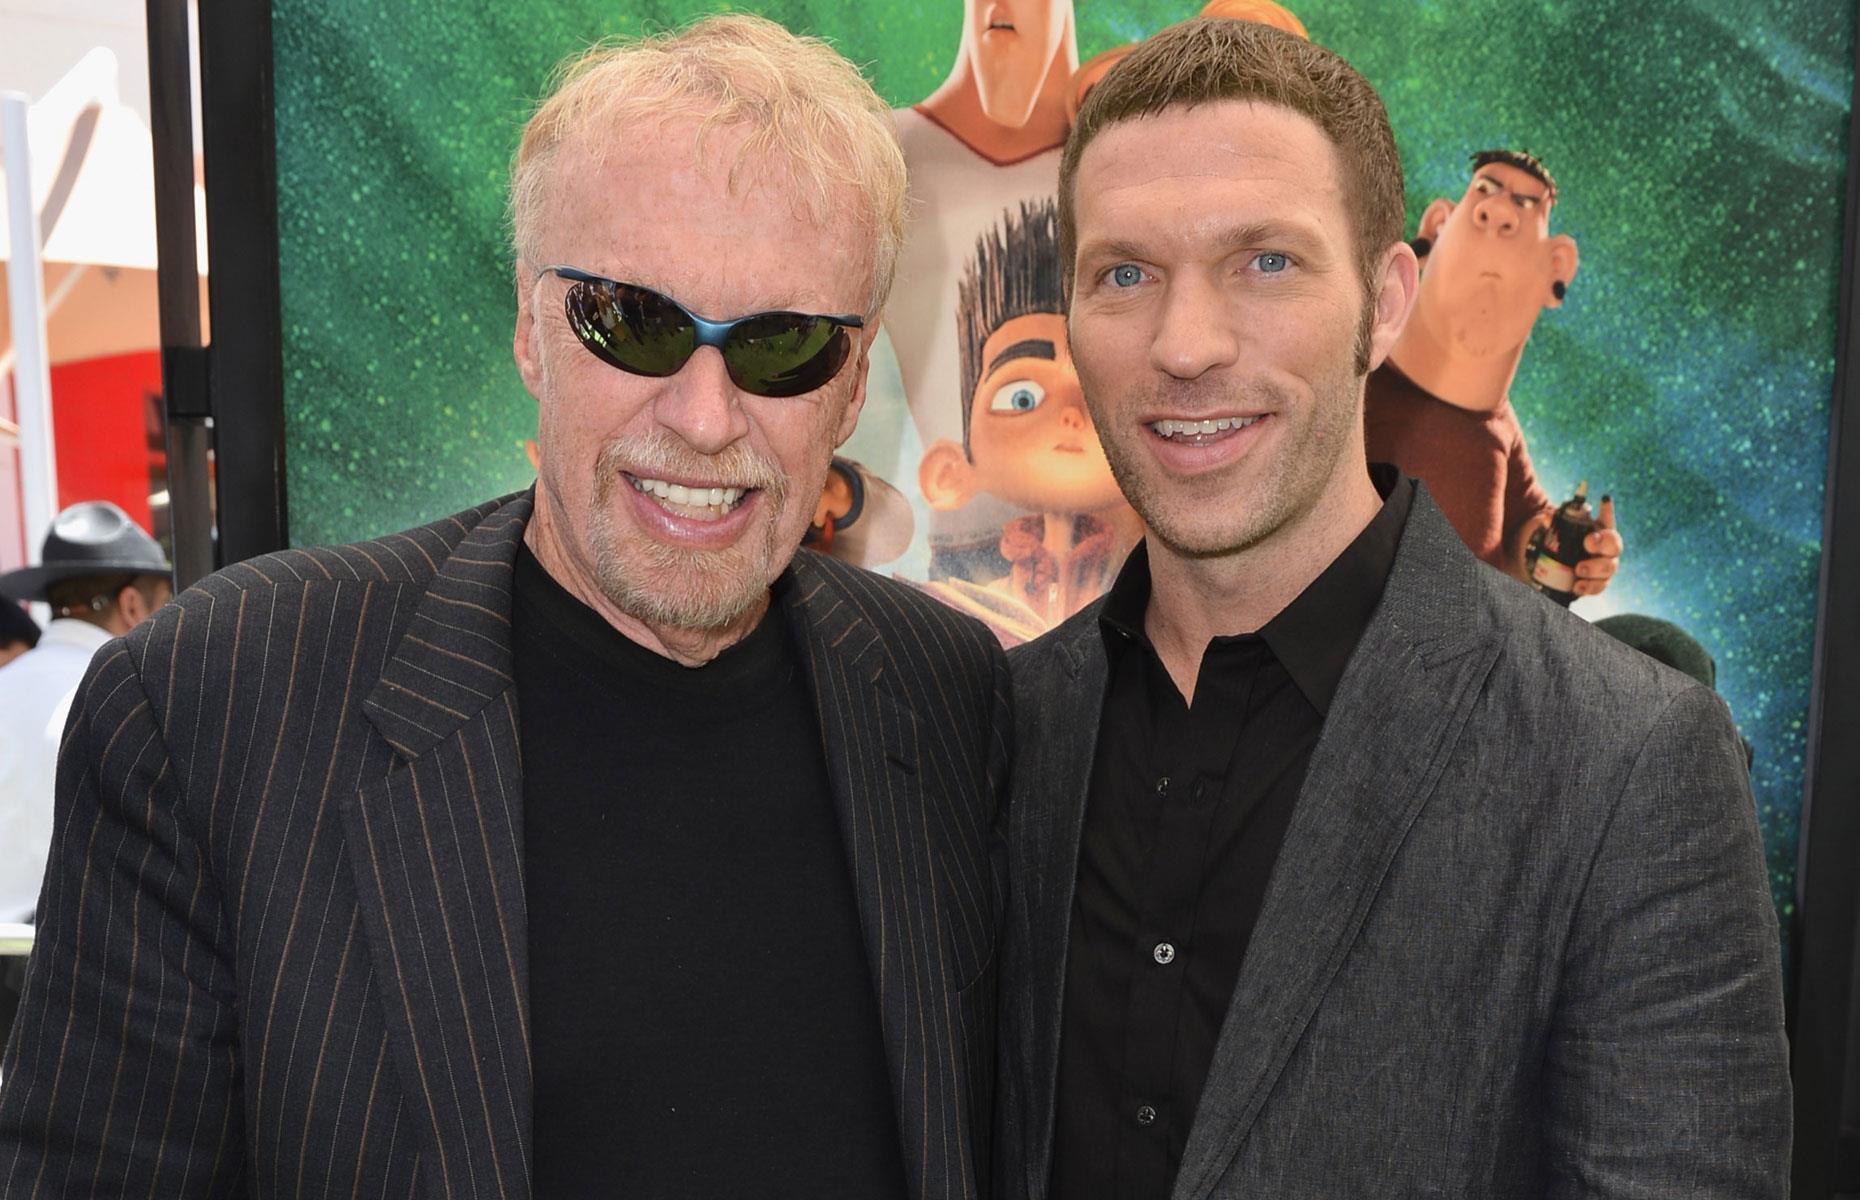 <p>In 1964, Phil Knight established sportswear trailblazer Nike with track coach Bill Bowerman in Oregon. Under the original name of Blue Ribbon Sports, the business set out to distribute Japanese athletic shoes in the US.</p>  <p>Knight's filmmaker son Travis (pictured here with his father) works for Laika, the family's animation studio. Knight's other son Matthew passed away in a scuba diving accident in 2004. </p>  <p>Knight has donated more than half a billion dollars to the University of Oregon and Stanford's Graduate School of Business, having studied at both. </p>